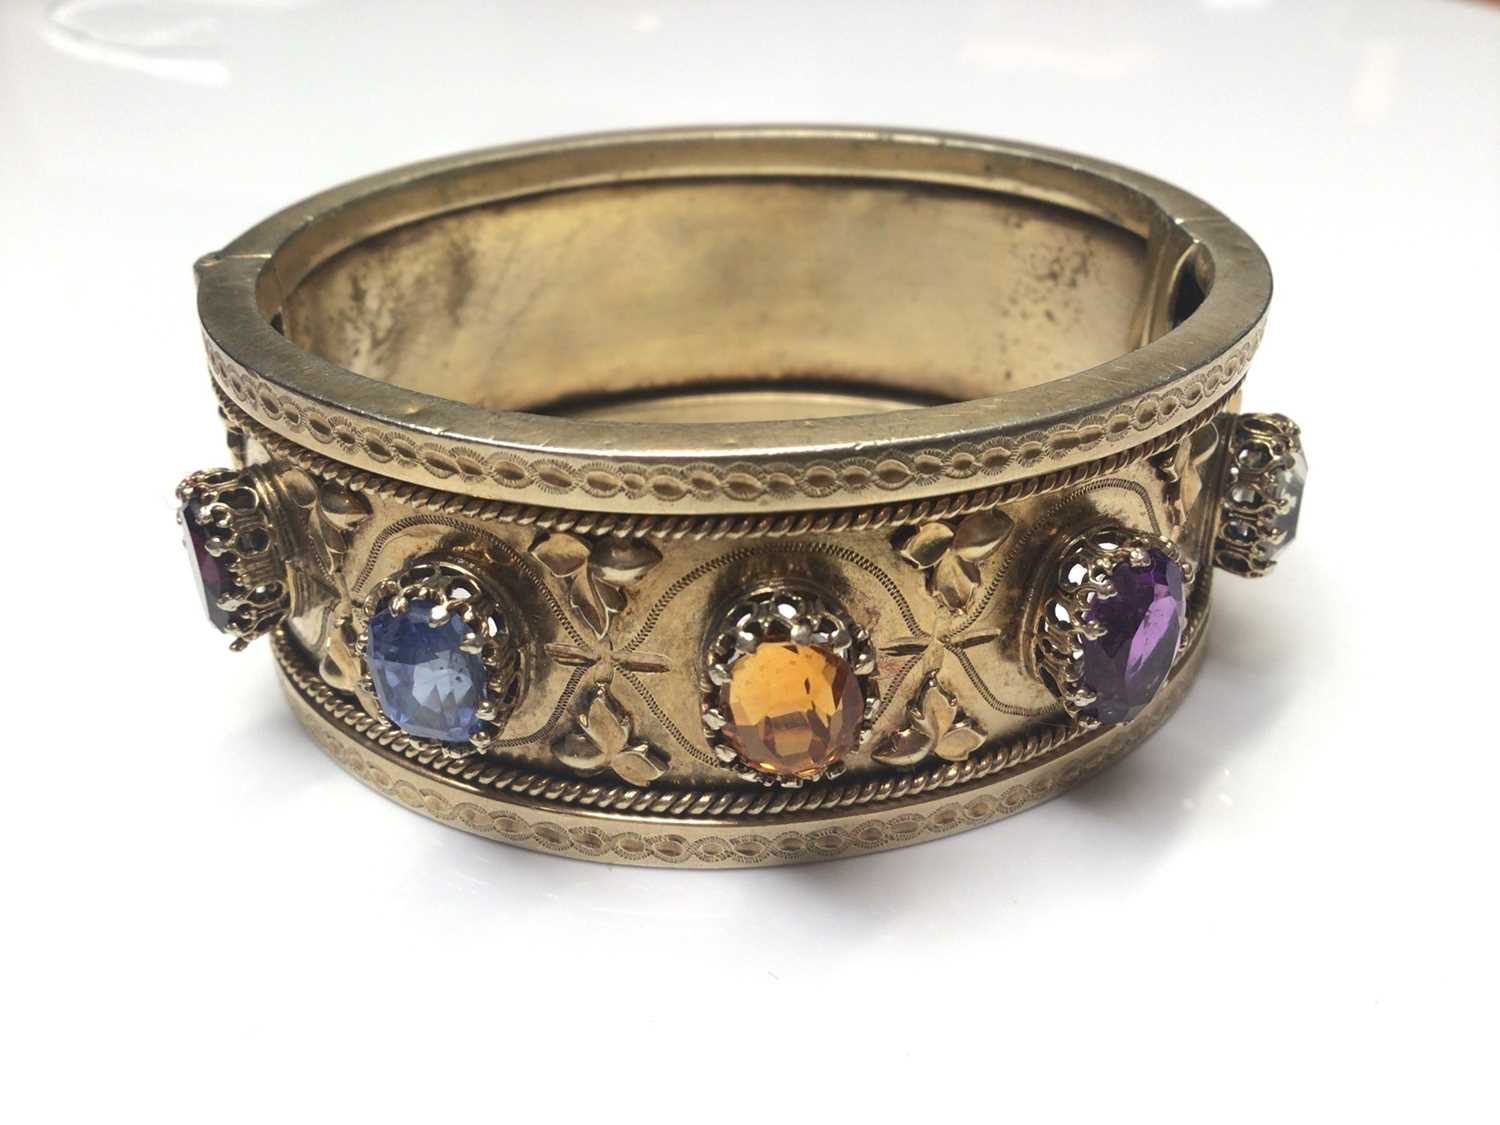 Lot 11 - Antique silver gilt cuff bangle set with five various coloured gem stones and applied leaf decoration